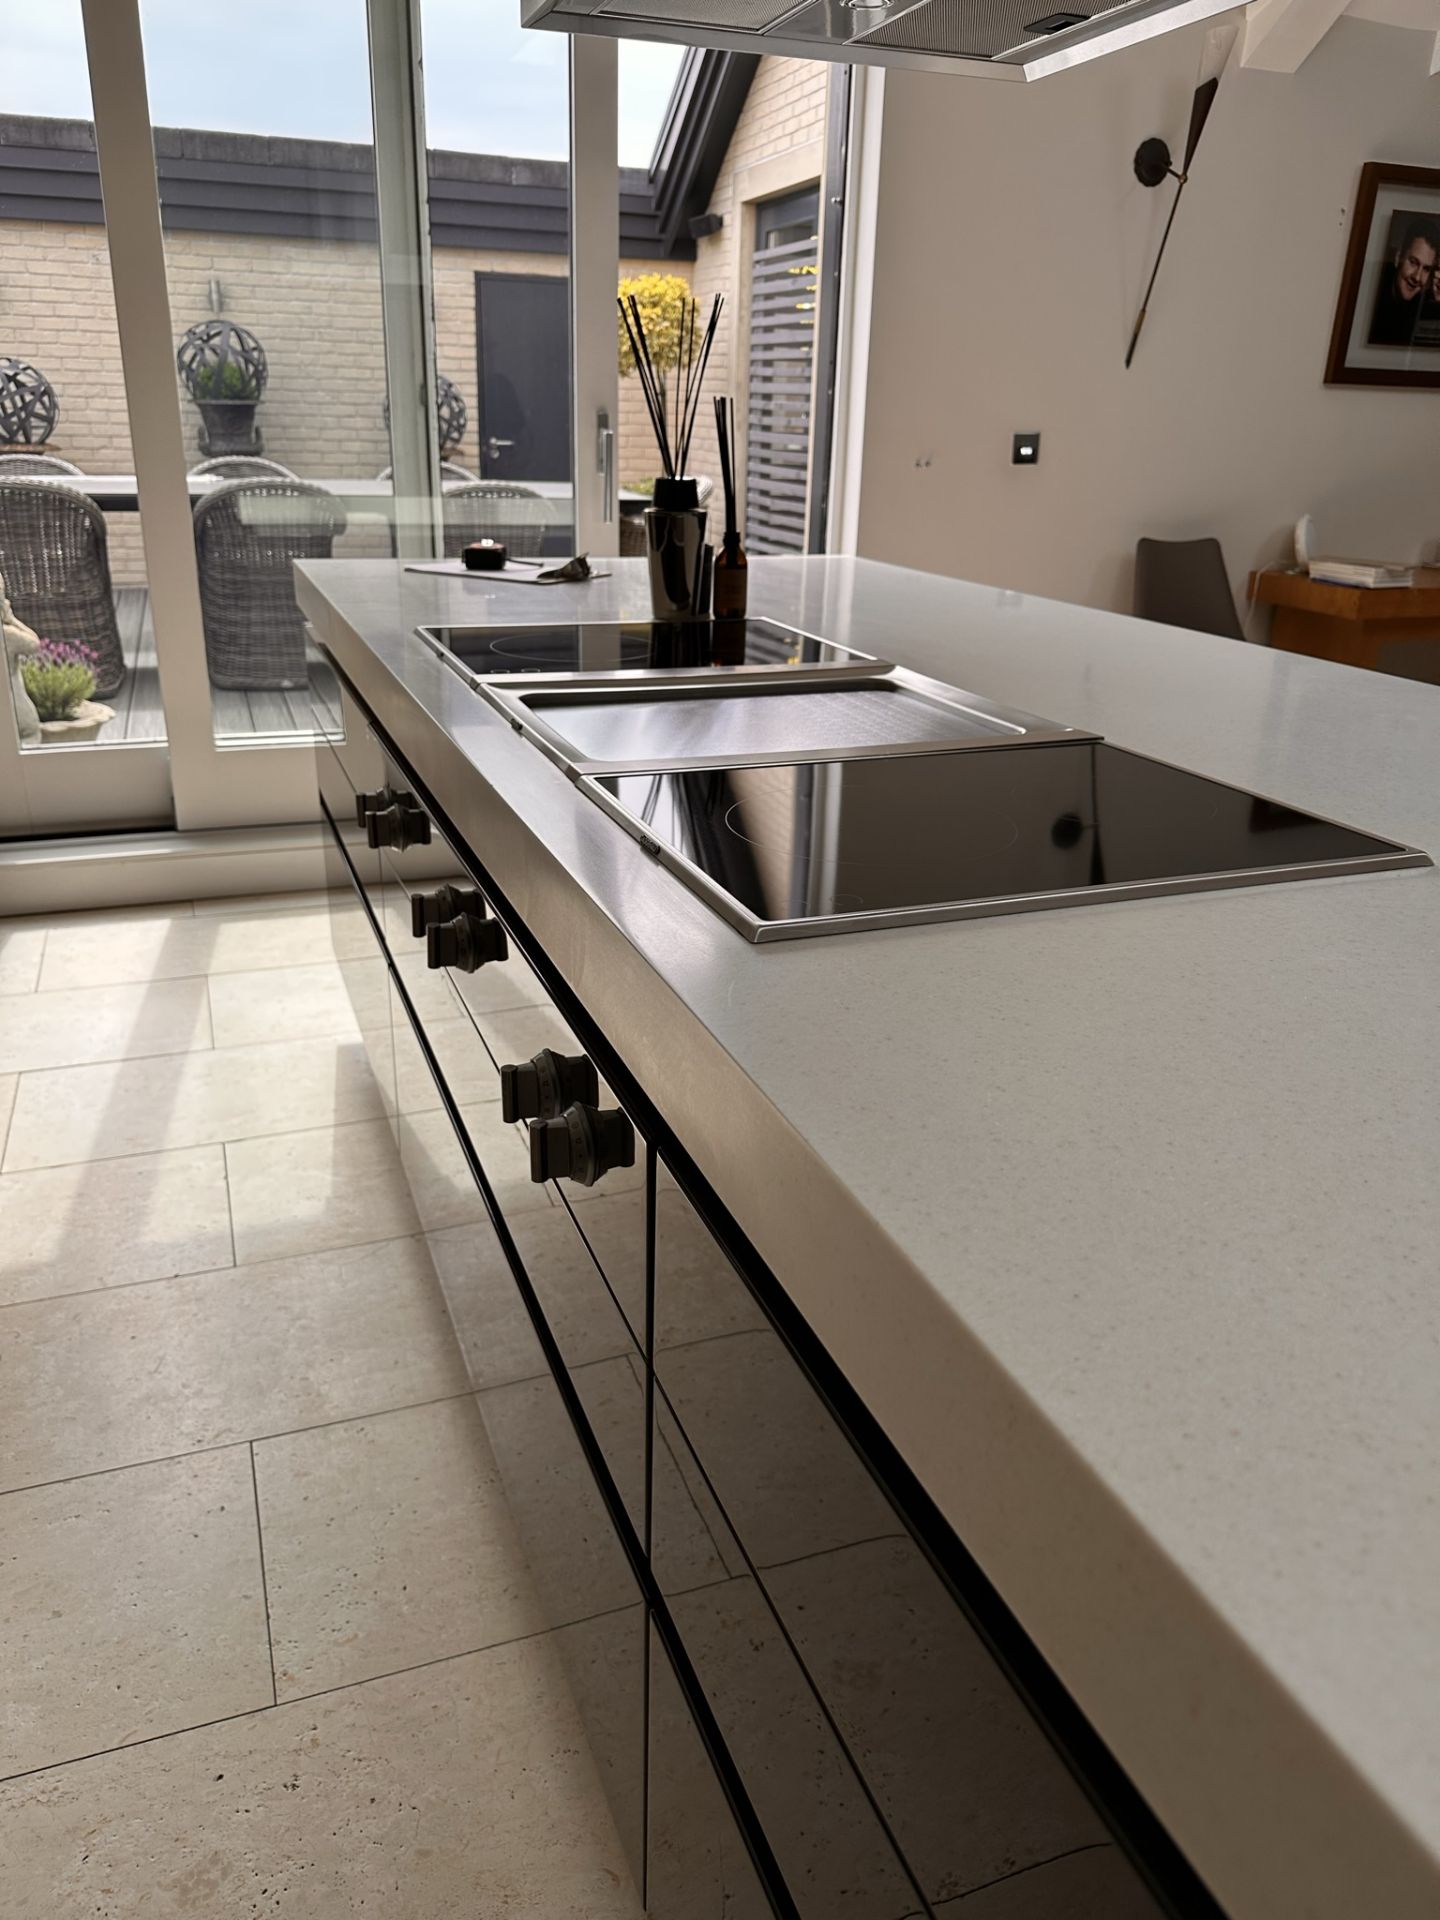 1 x Stunning Bespoke Siematic Gloss Fitted Kitchen With Corian Worktops - In Excellent Condition - - Image 72 of 94